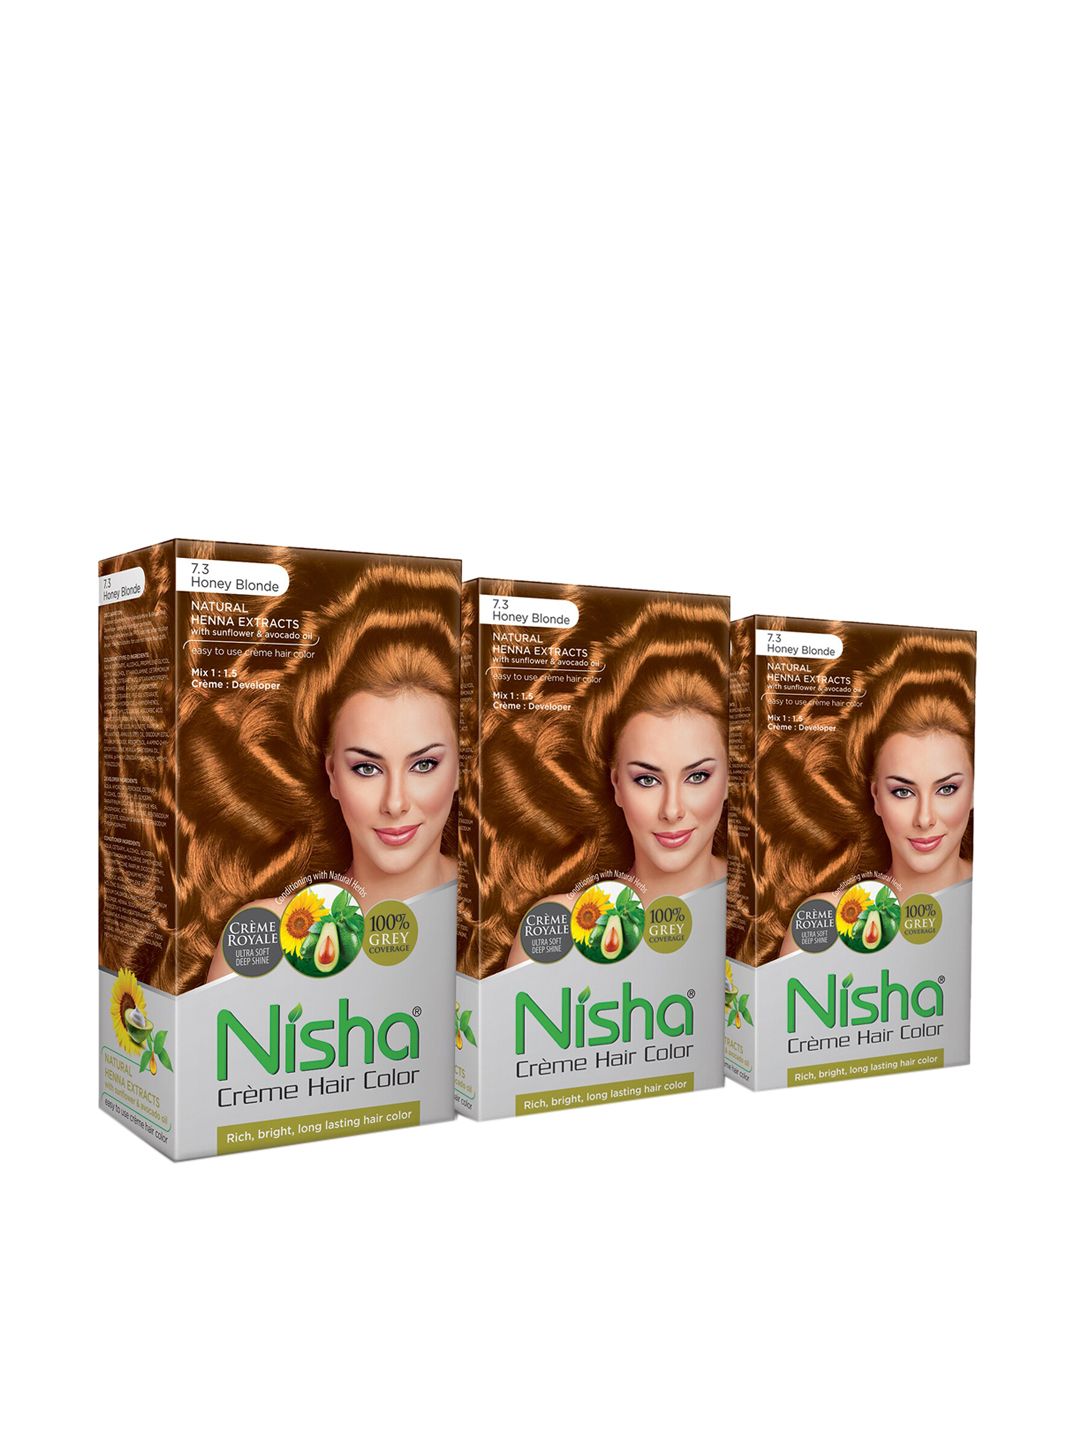 Nisha Pack of 3 Creme Hair Colour 450g - Honey Blonde Price in India